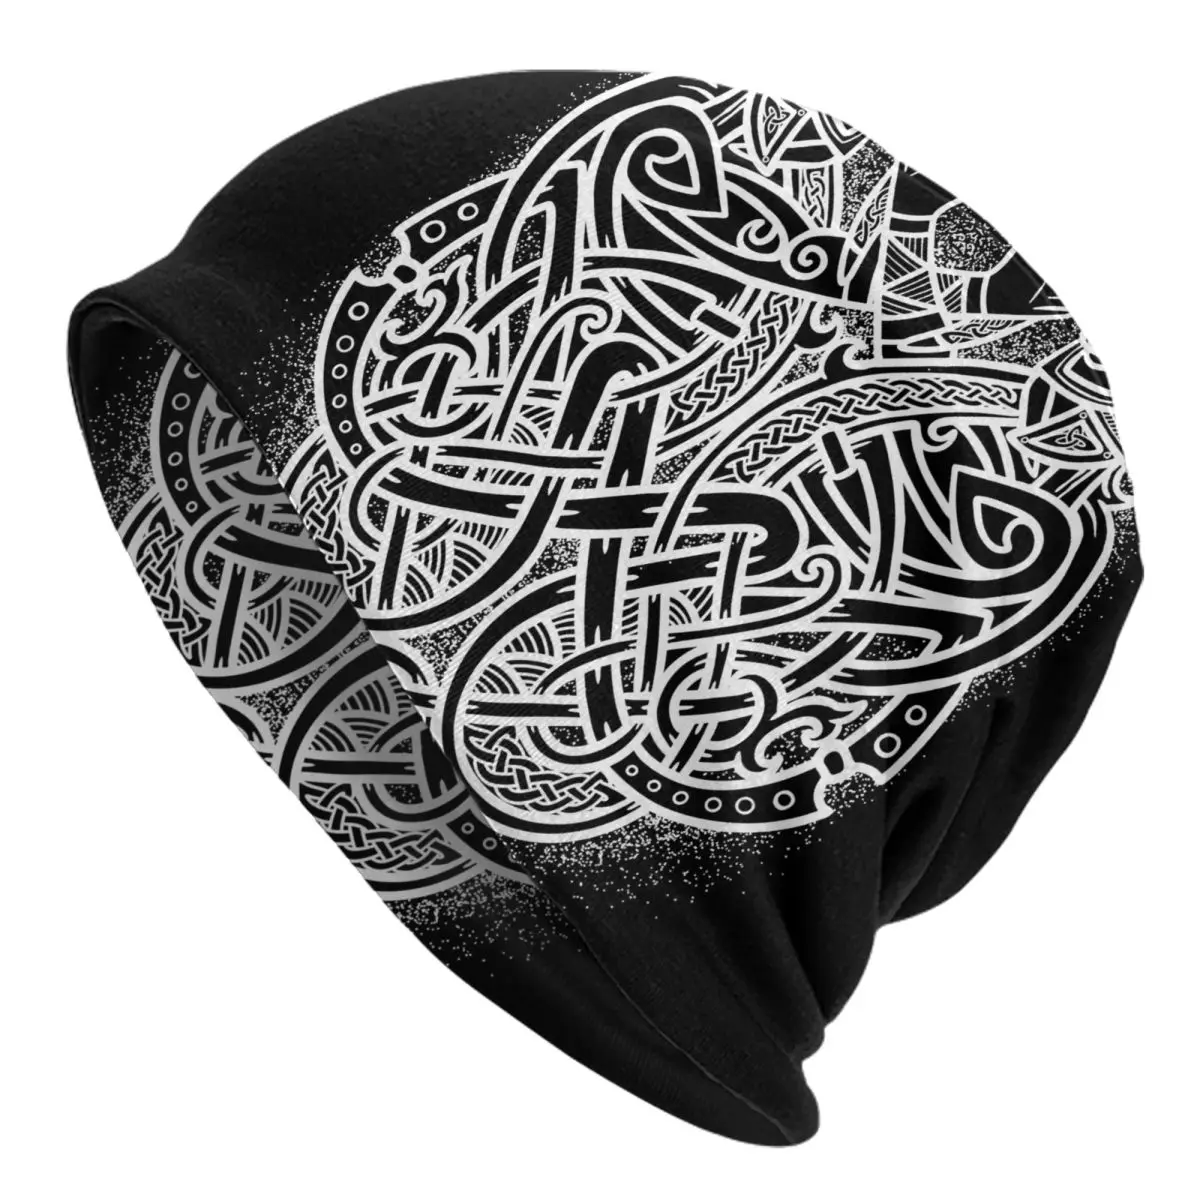 Drink To The Gods Adult Knit Hat Men's Women's Keep warm winter knitted hat